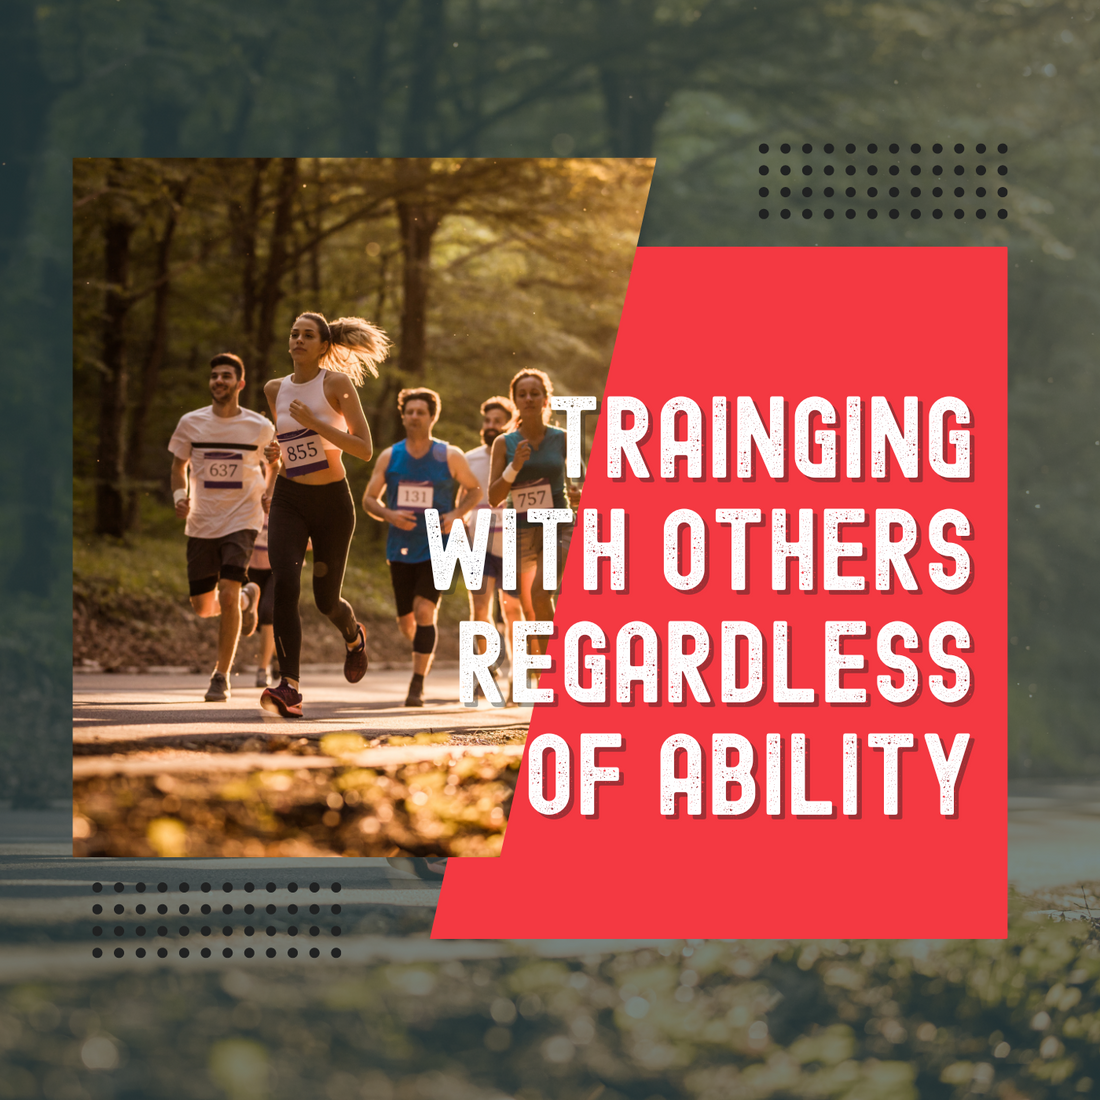 How to train well with others, when fitness or ability are varied?